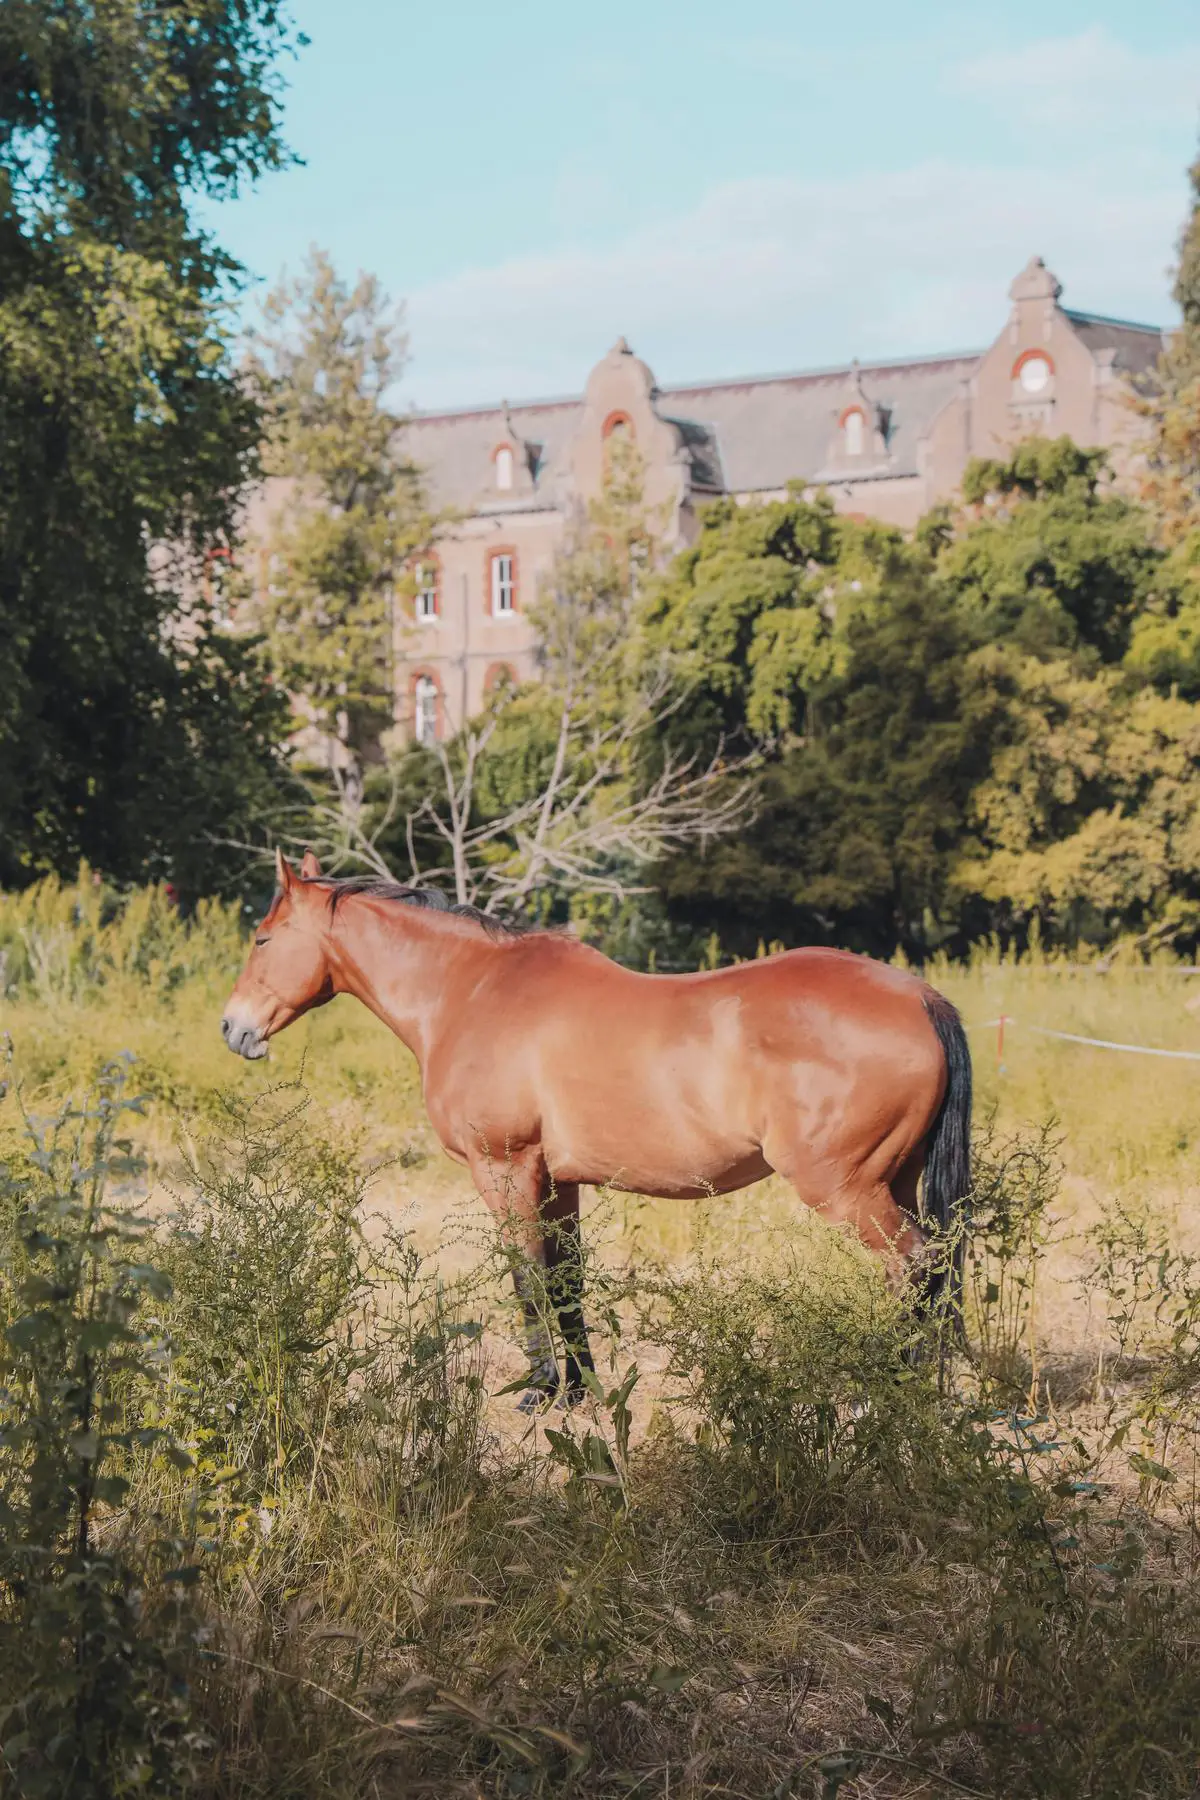 Image description: A beautiful draft horse standing in a lush green pasture.